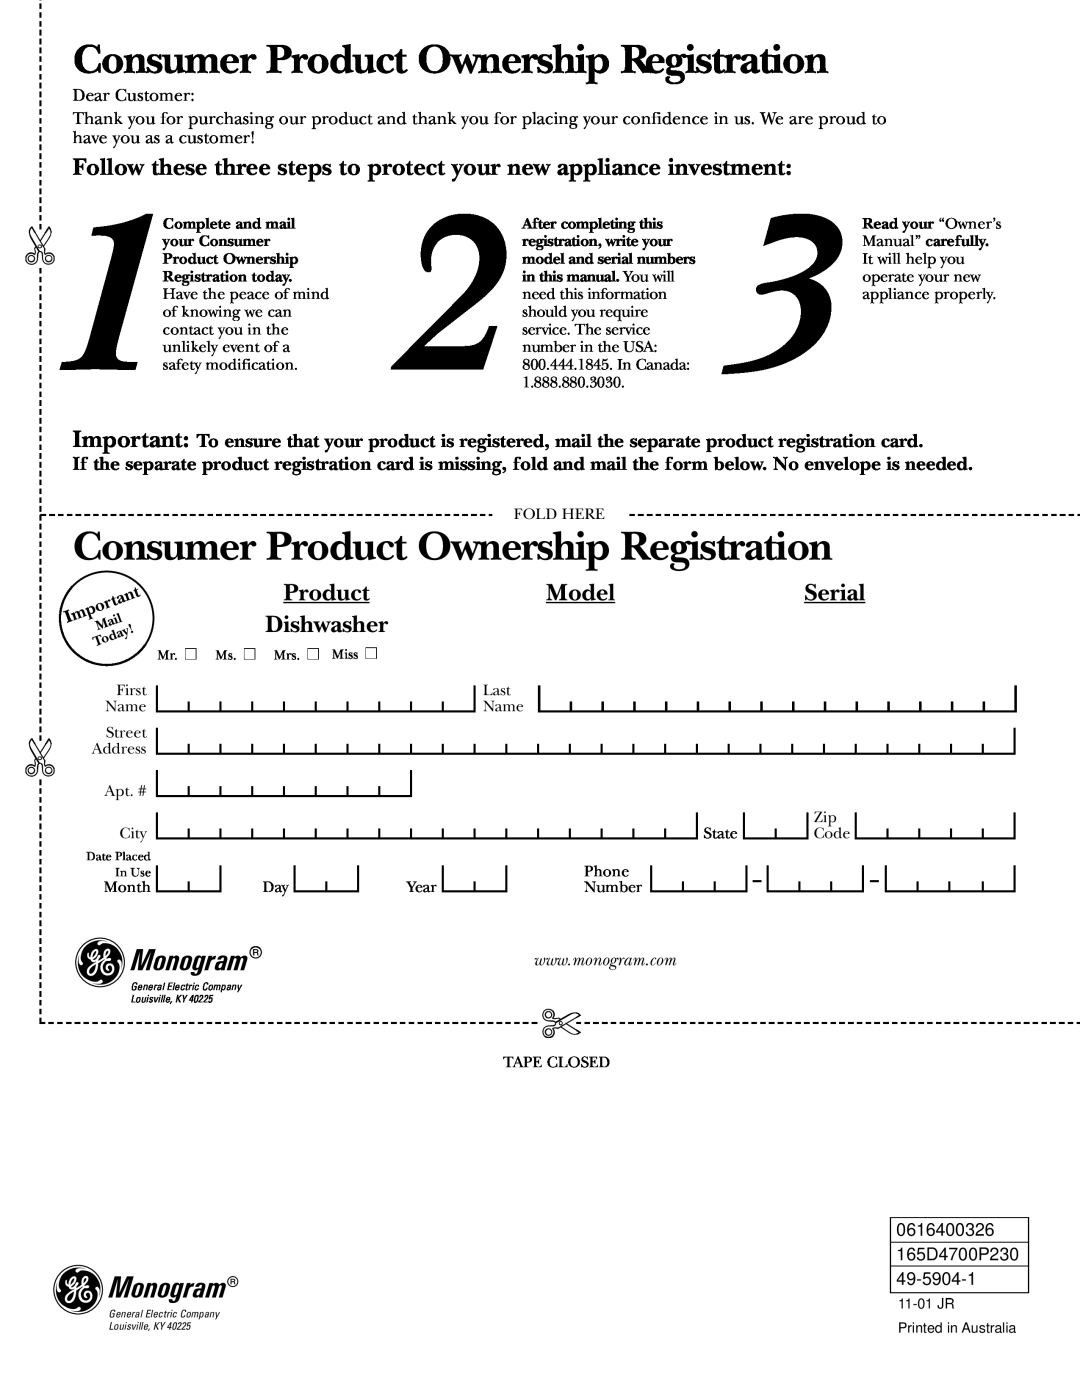 GE ZBD6700 Consumer Product Ownership Registration, Follow these three steps to protect your new appliance investment 